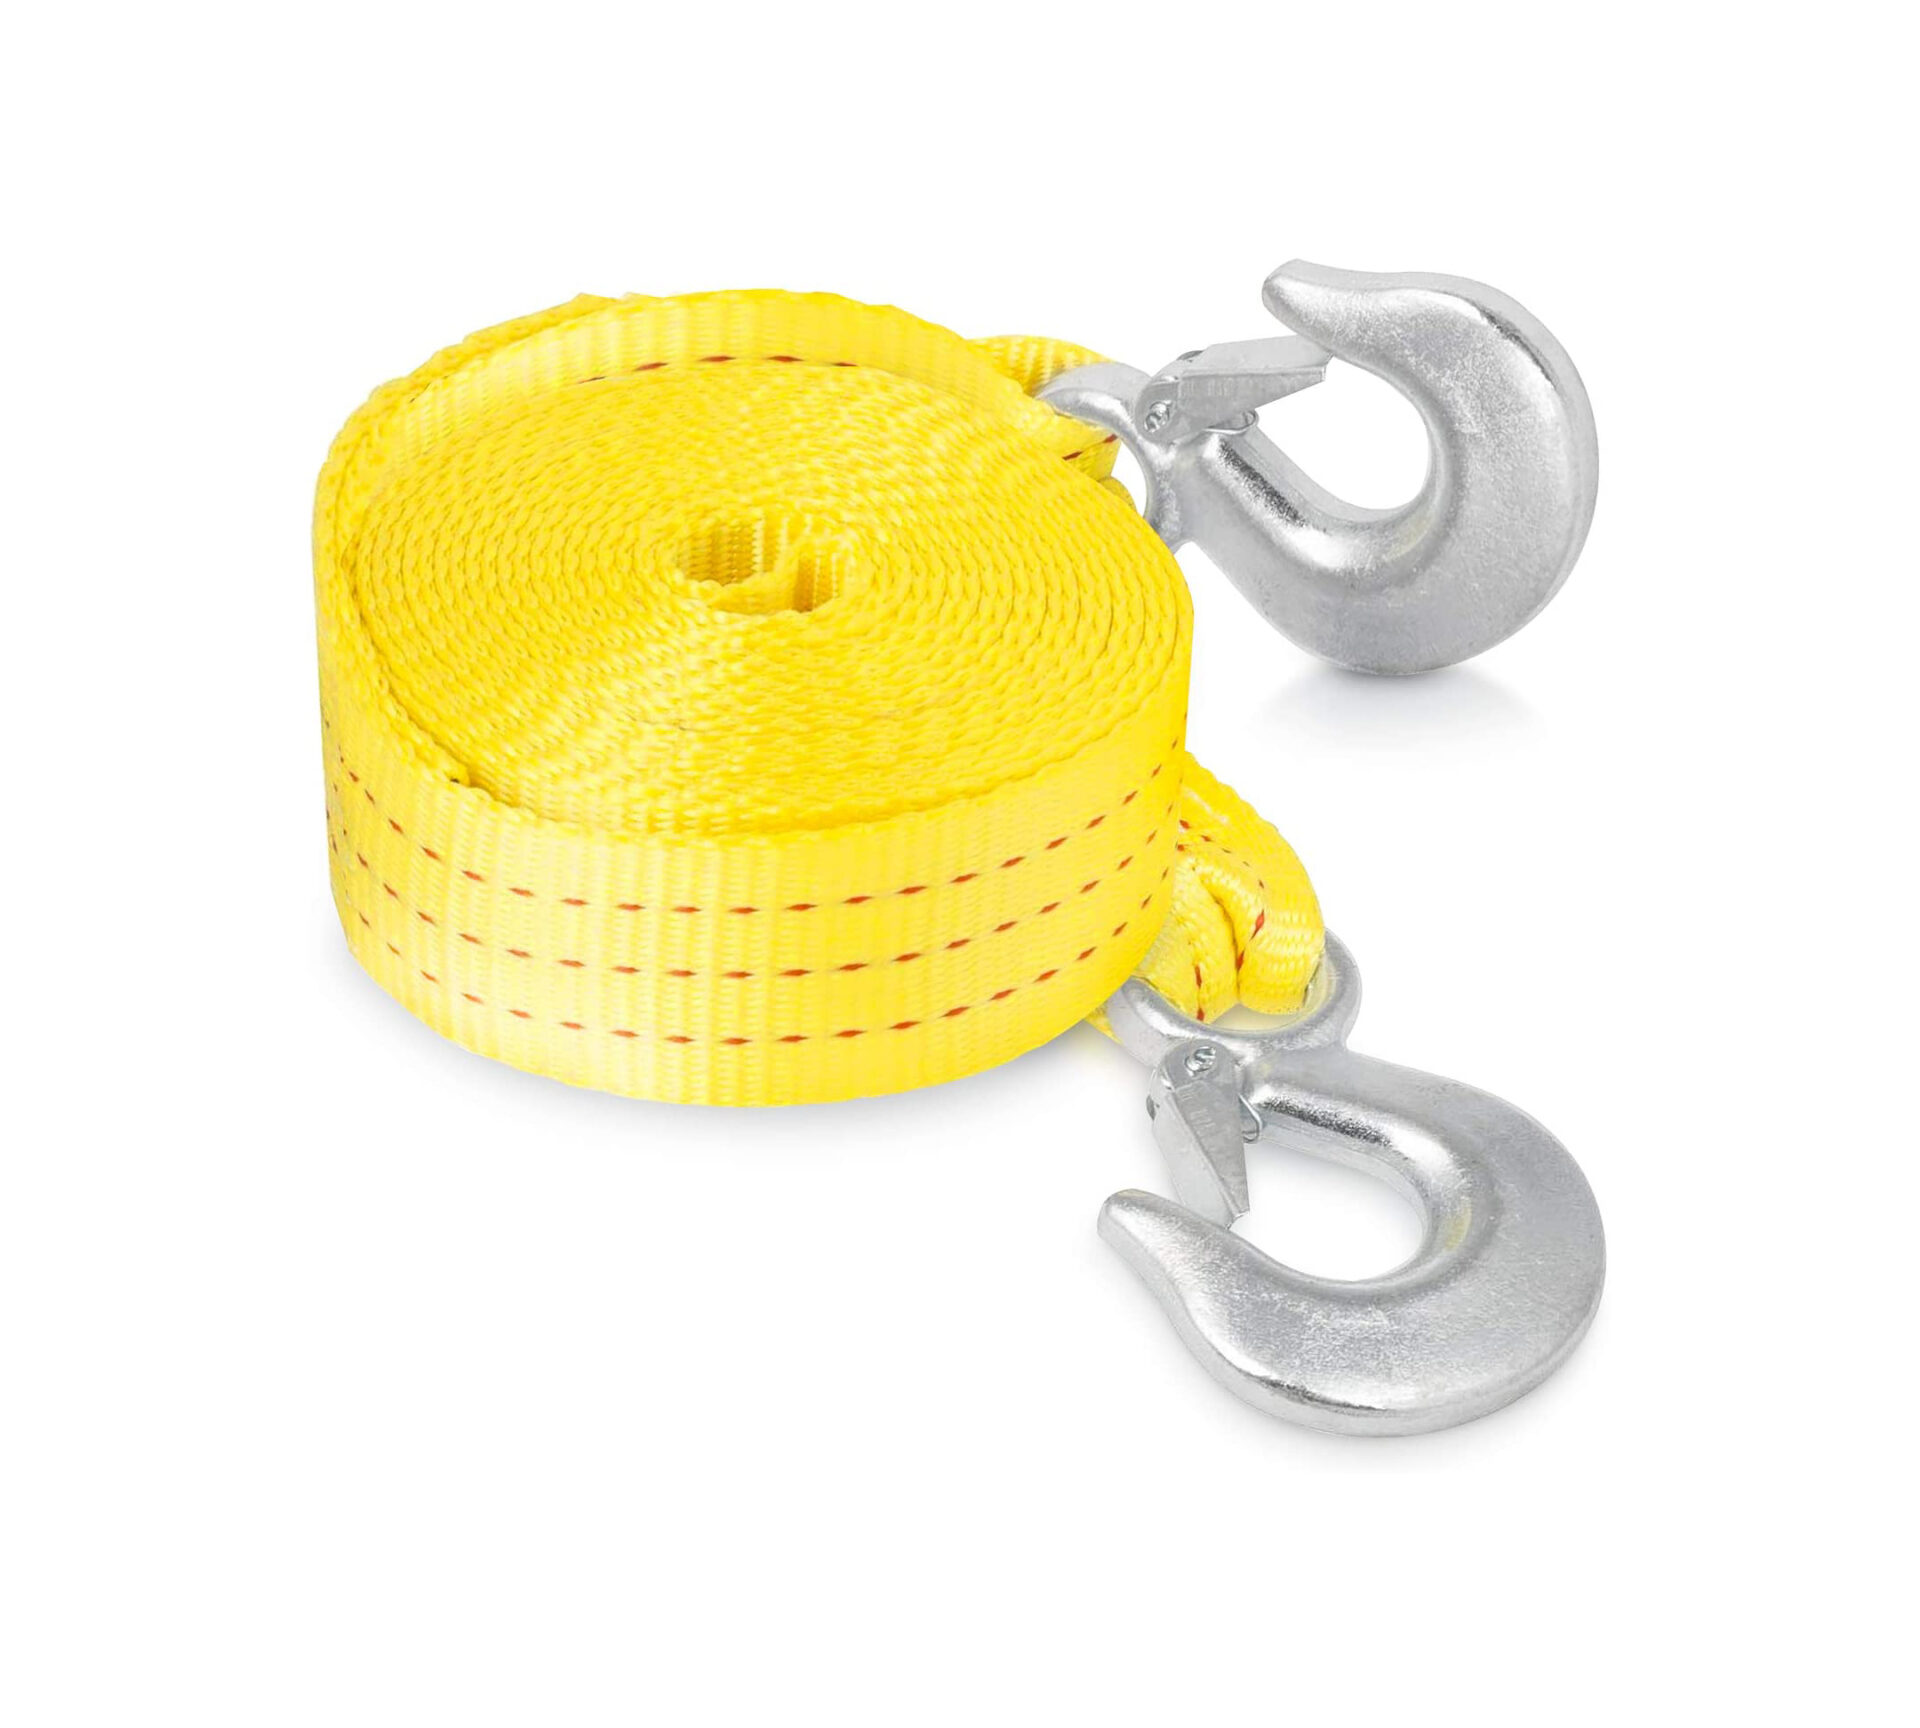 2″x20′ SAFETY HOOK TOW STRAP